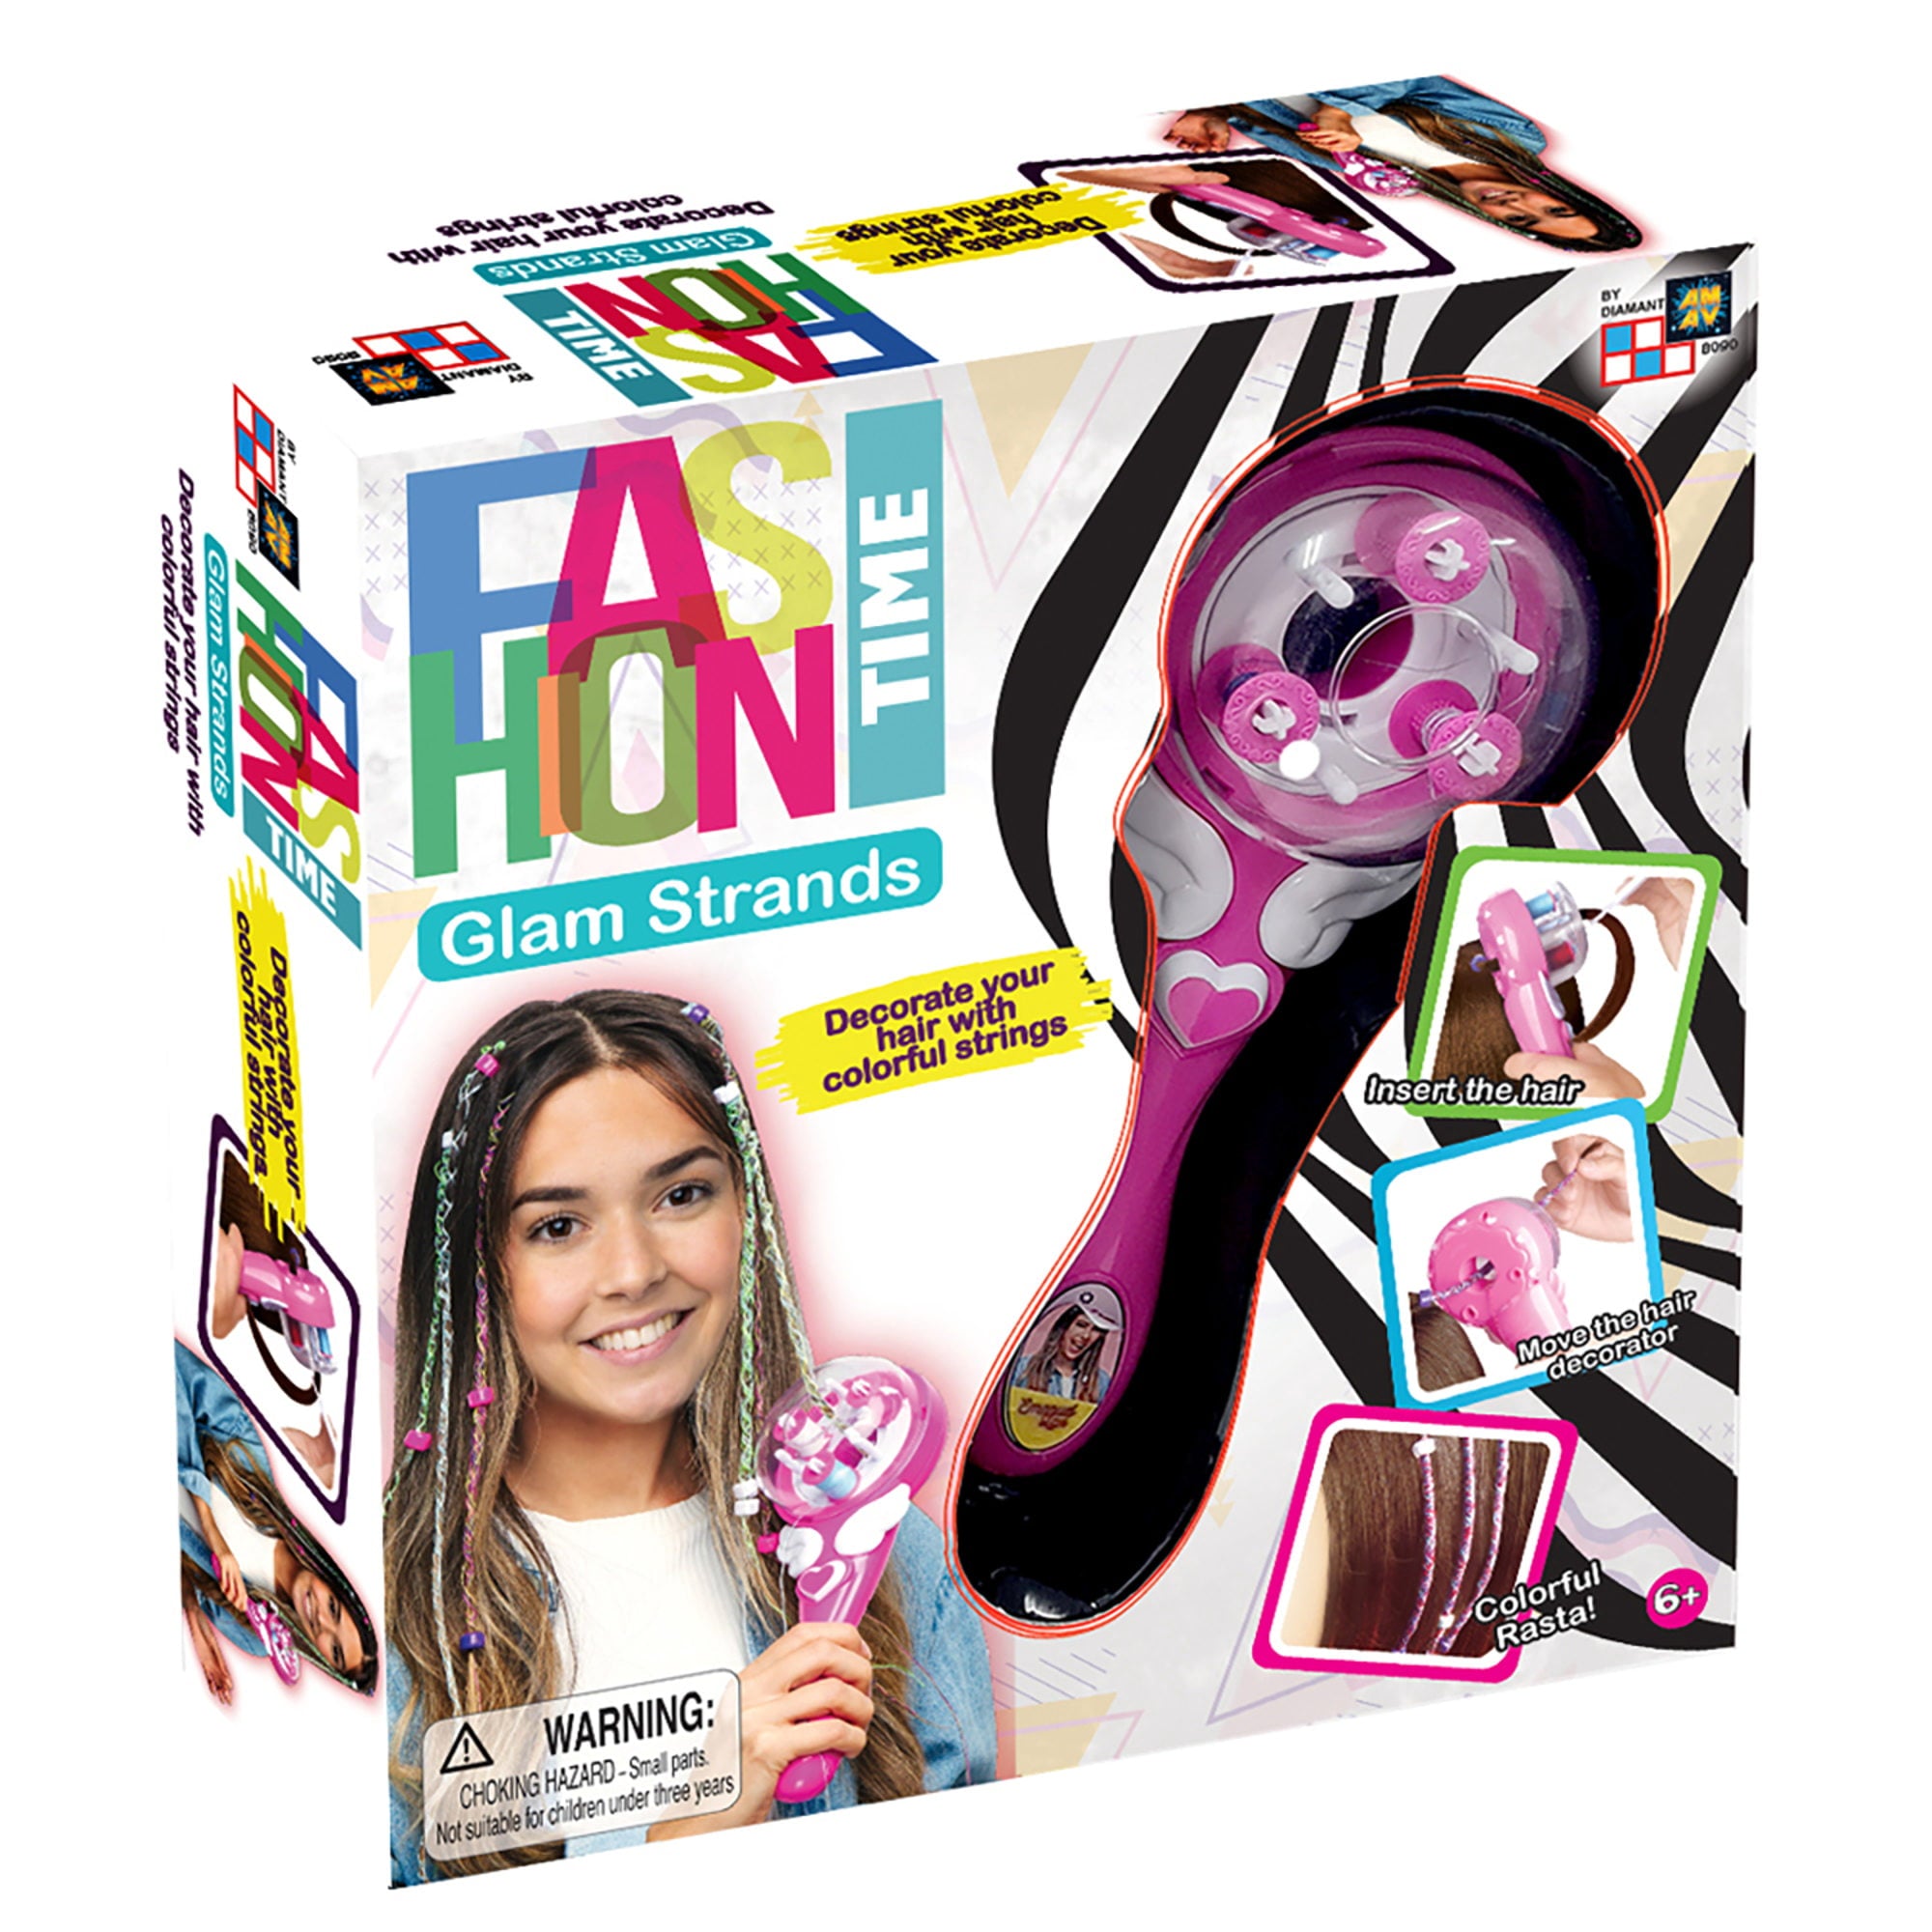 AMAV Fashion Time Glam Strands Hair Wrap Kit, Glam Strand Making Tool that creates fun and colorful designs in your hai , Children Ages 6 and Up